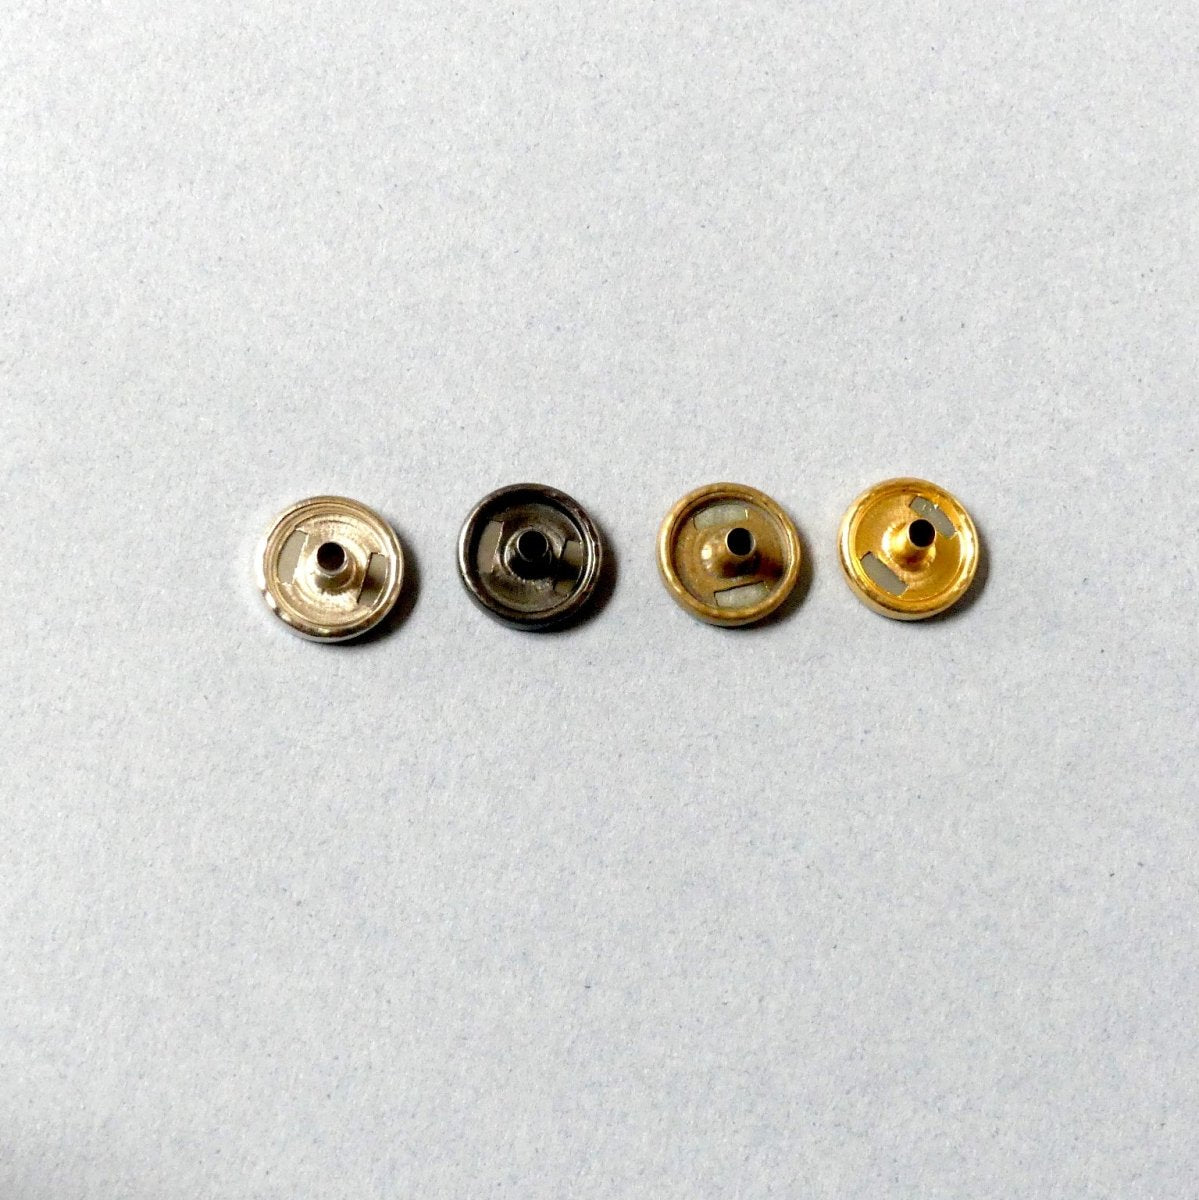 Copper Zinc Alloy Button Fasteners Studs Sewing Clasp Buttons